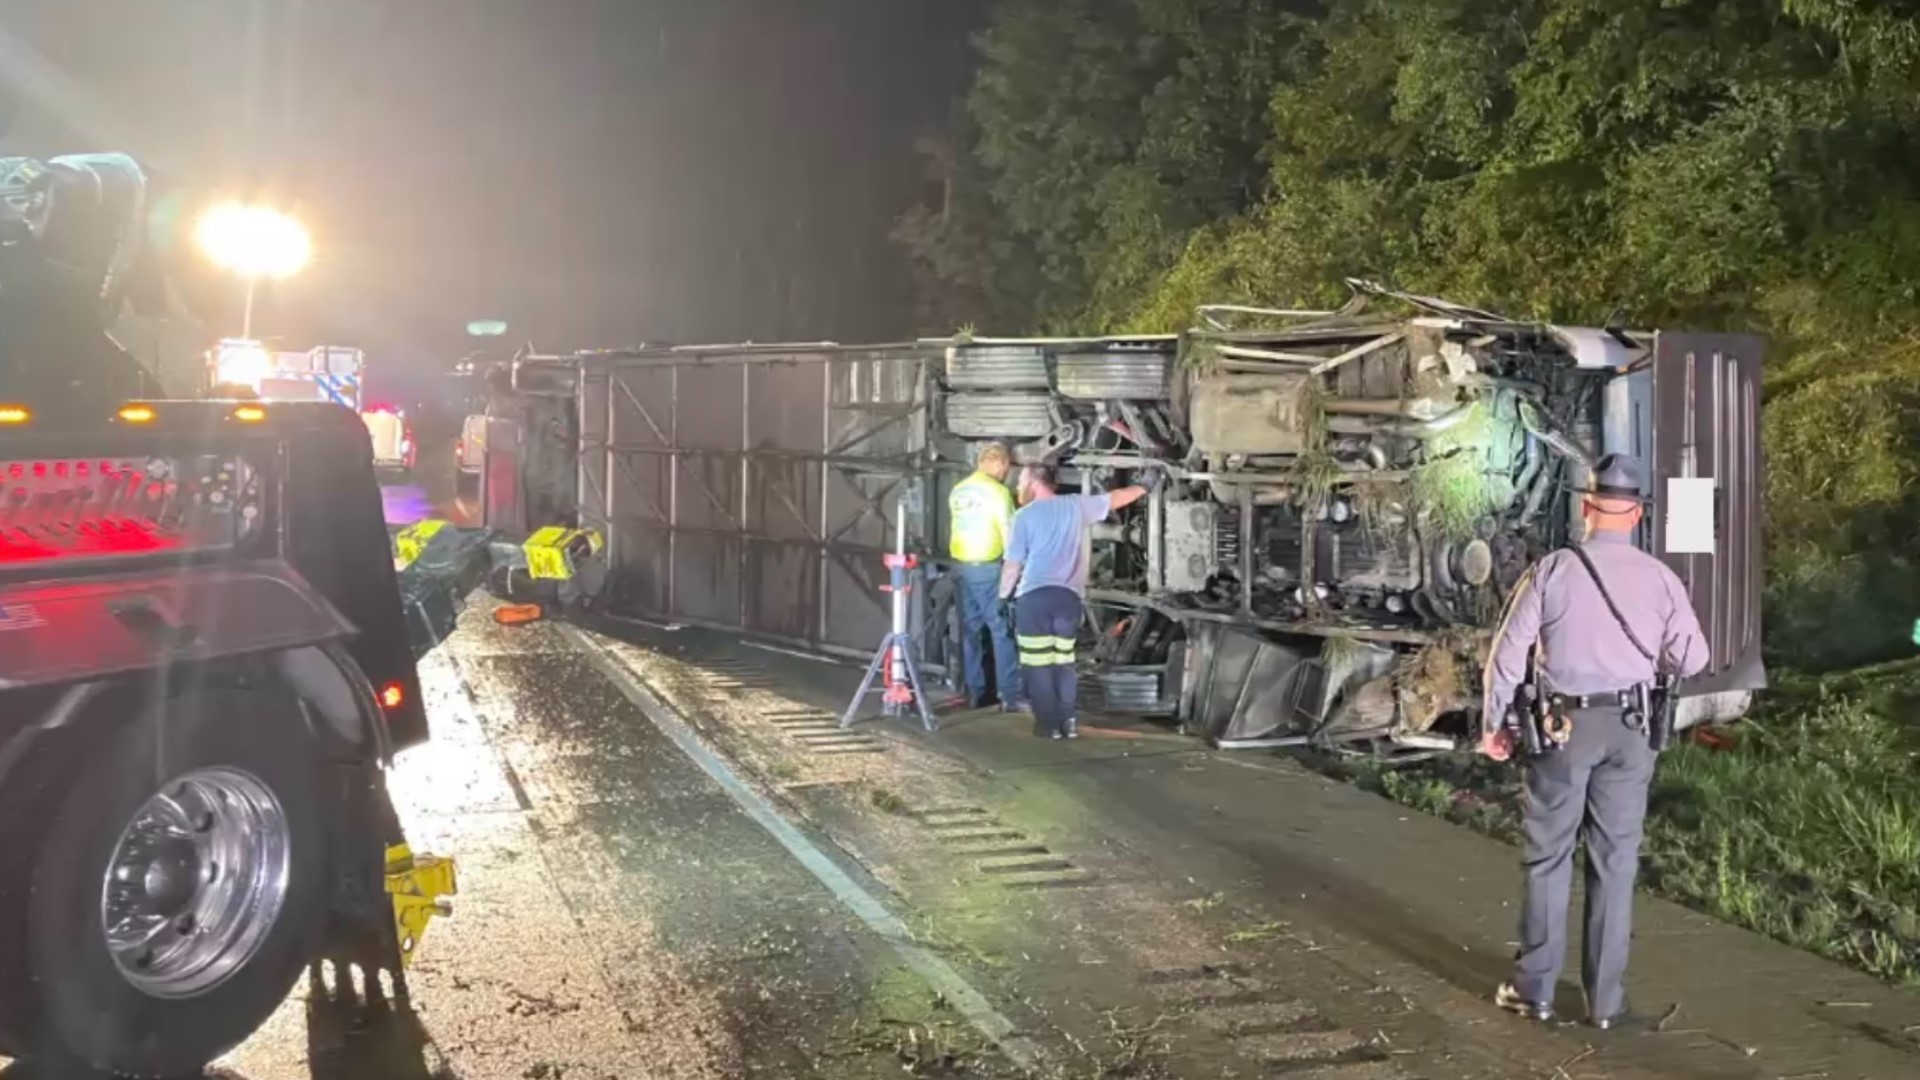 Interstate 81 southbound was shut down between Exits 77 and 72, as crews worked to clean and clear the scene.